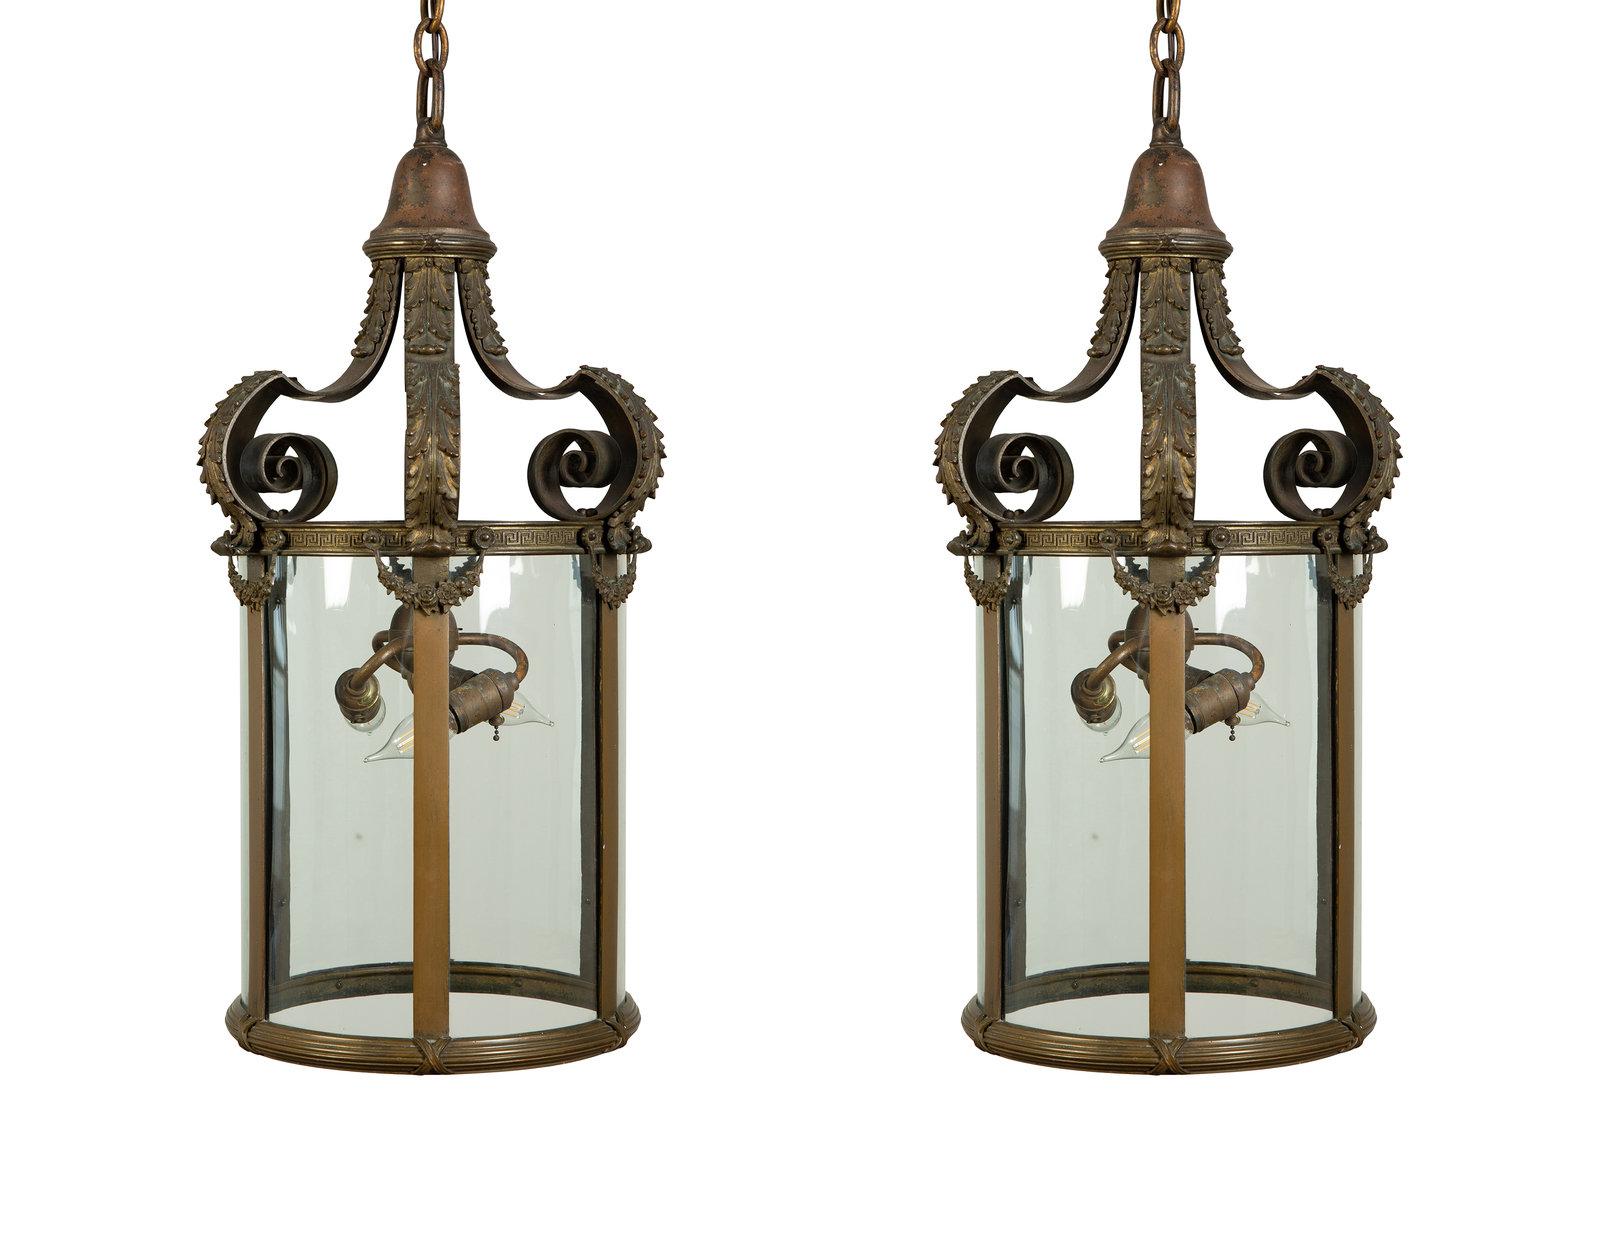 A fine & elegant gilt bronze Louis XVI style Lantern. Curved glass panels. 
Pair available. France, circa 1920.
Dimensions: Height 28